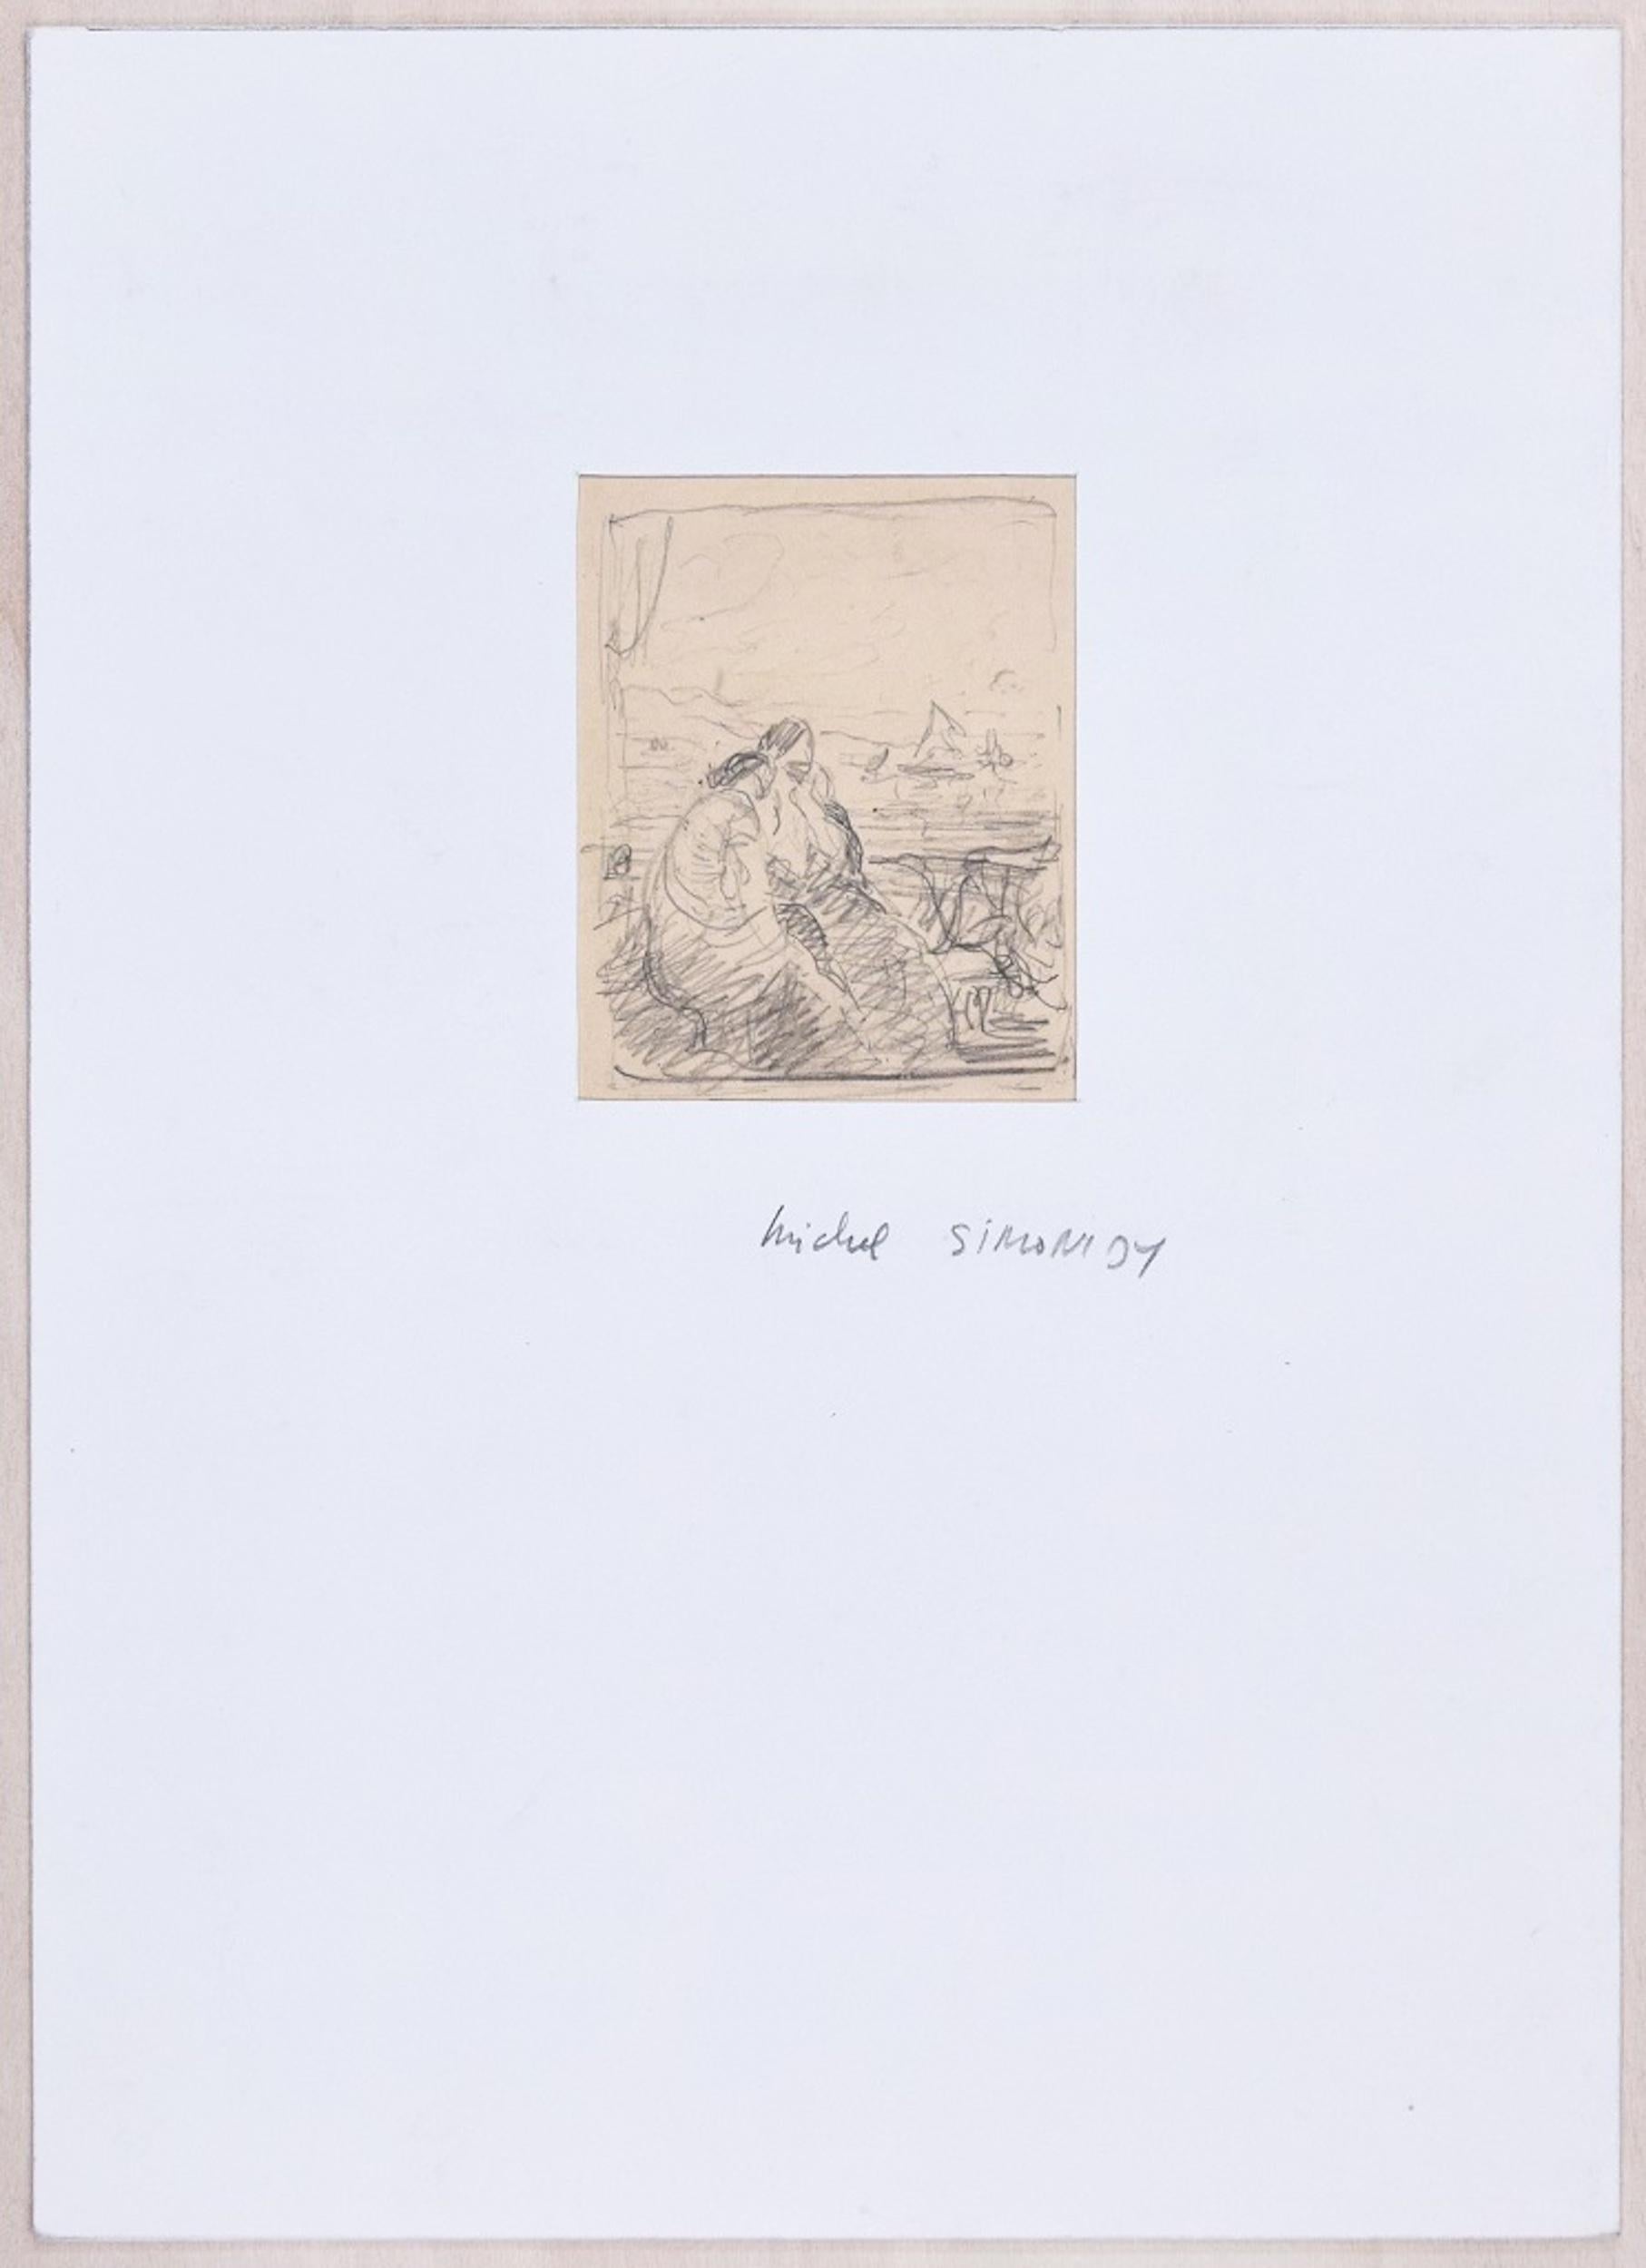 Deux Baigneuses is an original artwork realized by Michel Simonidy in the first years of the XX Century. 

Pencil on paper. Passepartout included (cm 26.5 x 19).

Mint conditions.

Very fresh artwork representing two bathers in the nature with a